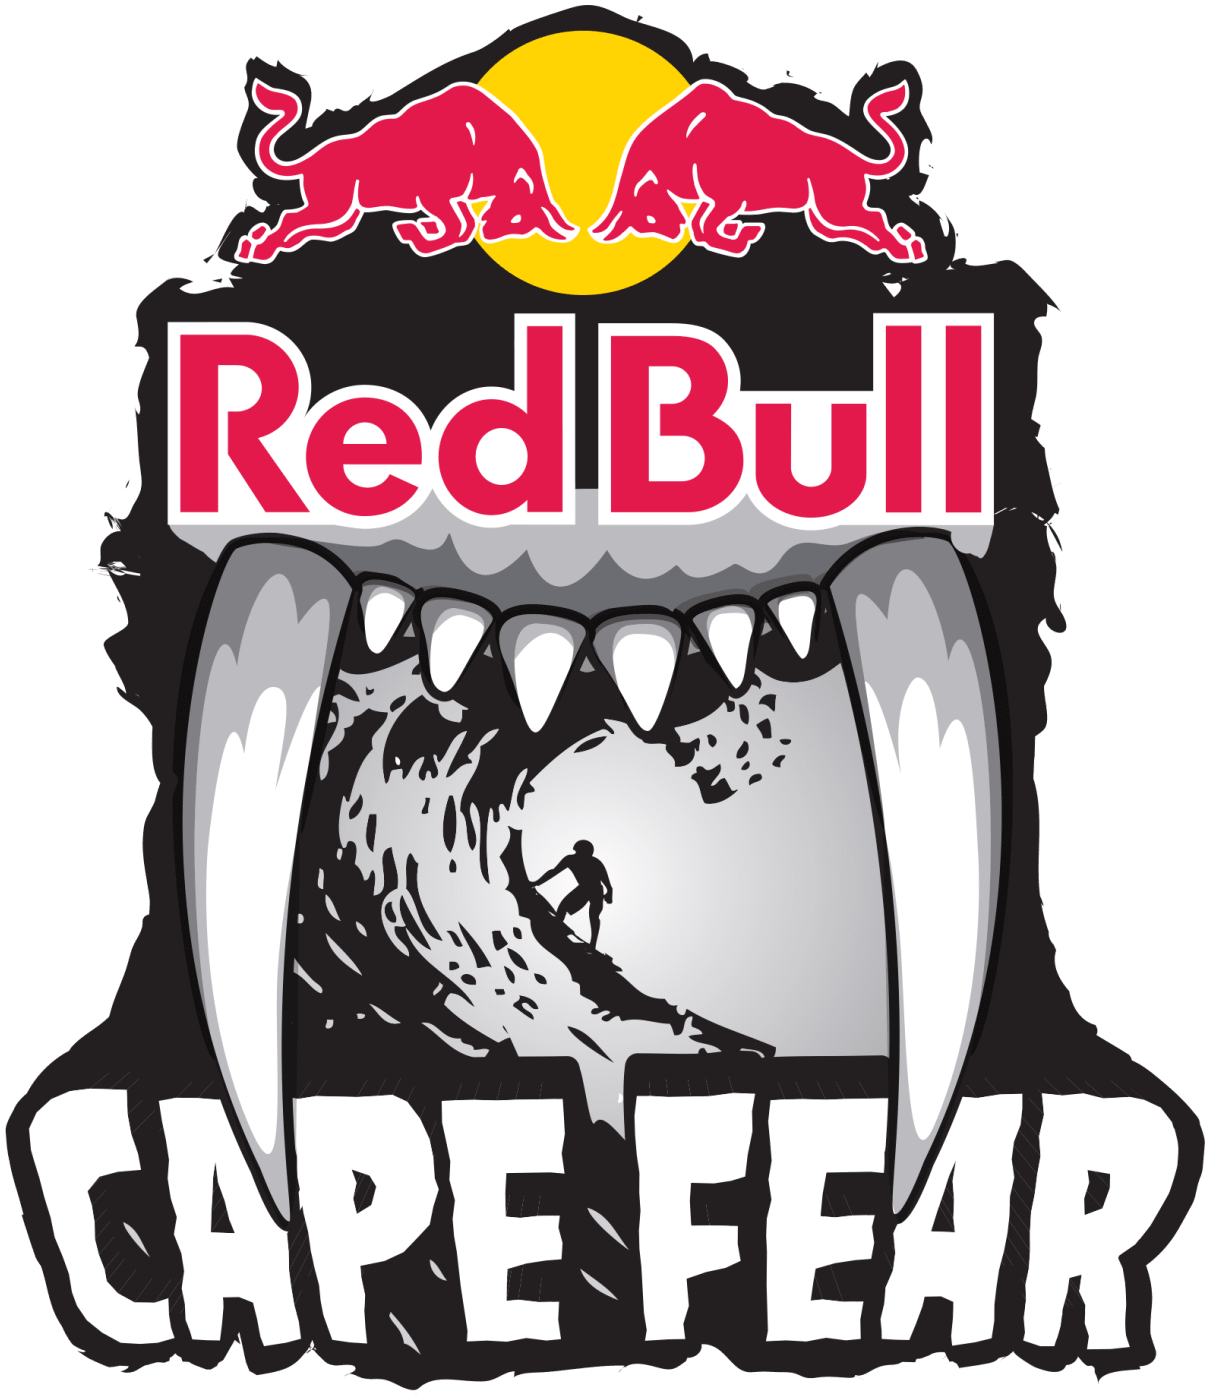 Red Bull Cape Fear 2021 Slab Surfing Competition